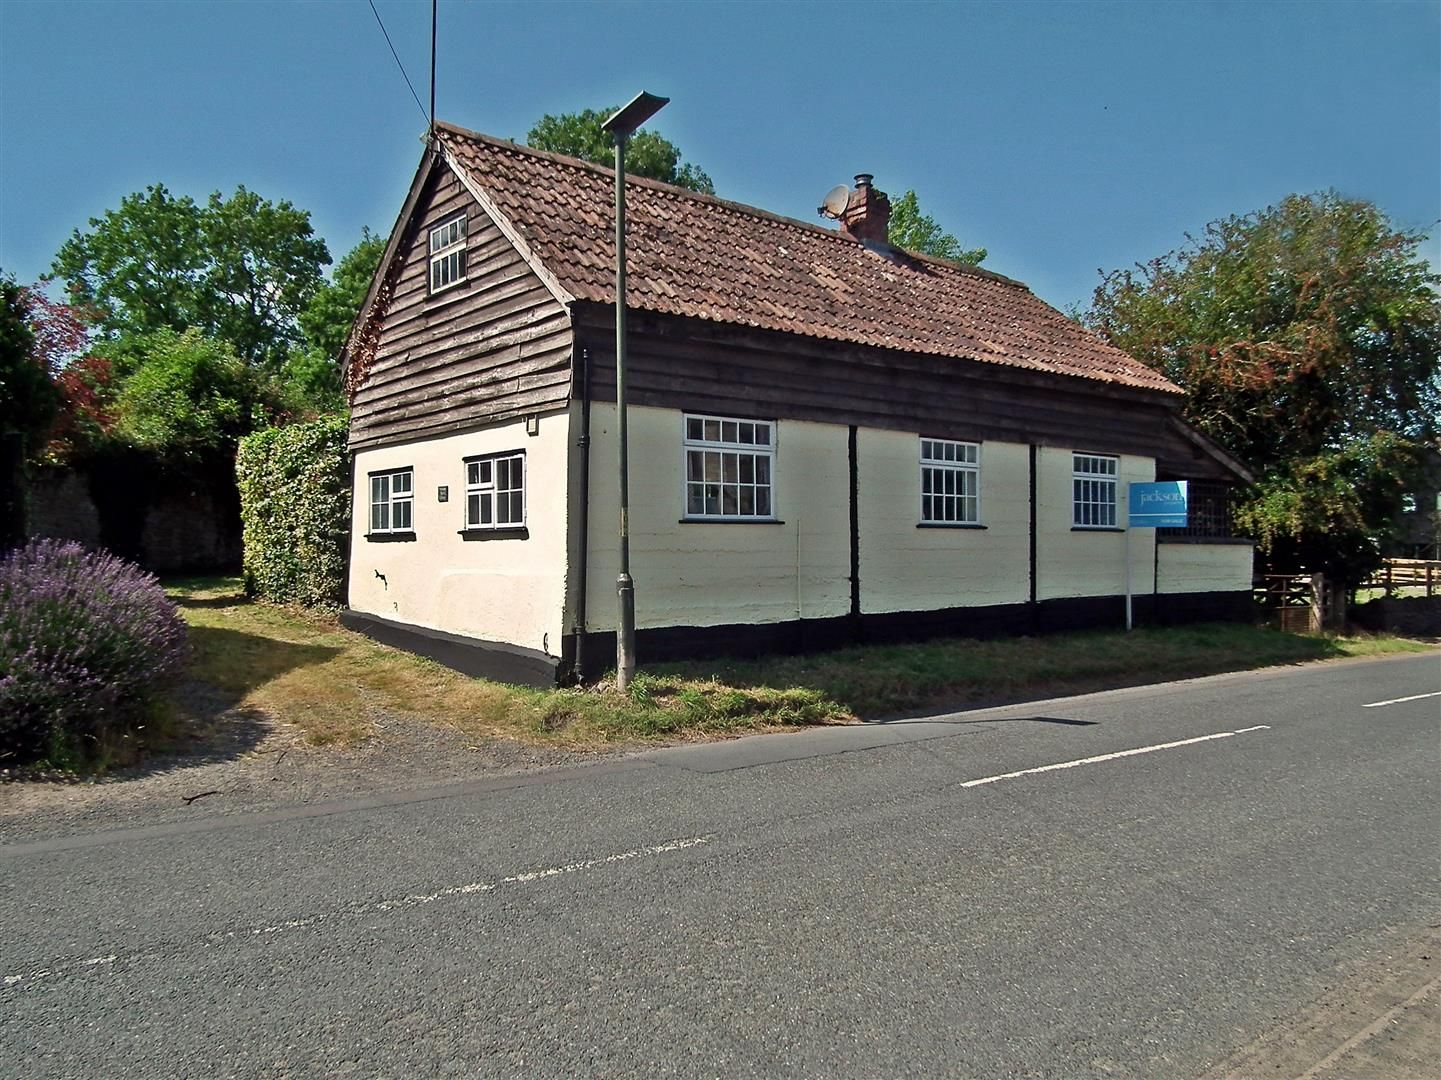 3 bed cottage for sale in Weobley  - Property Image 1